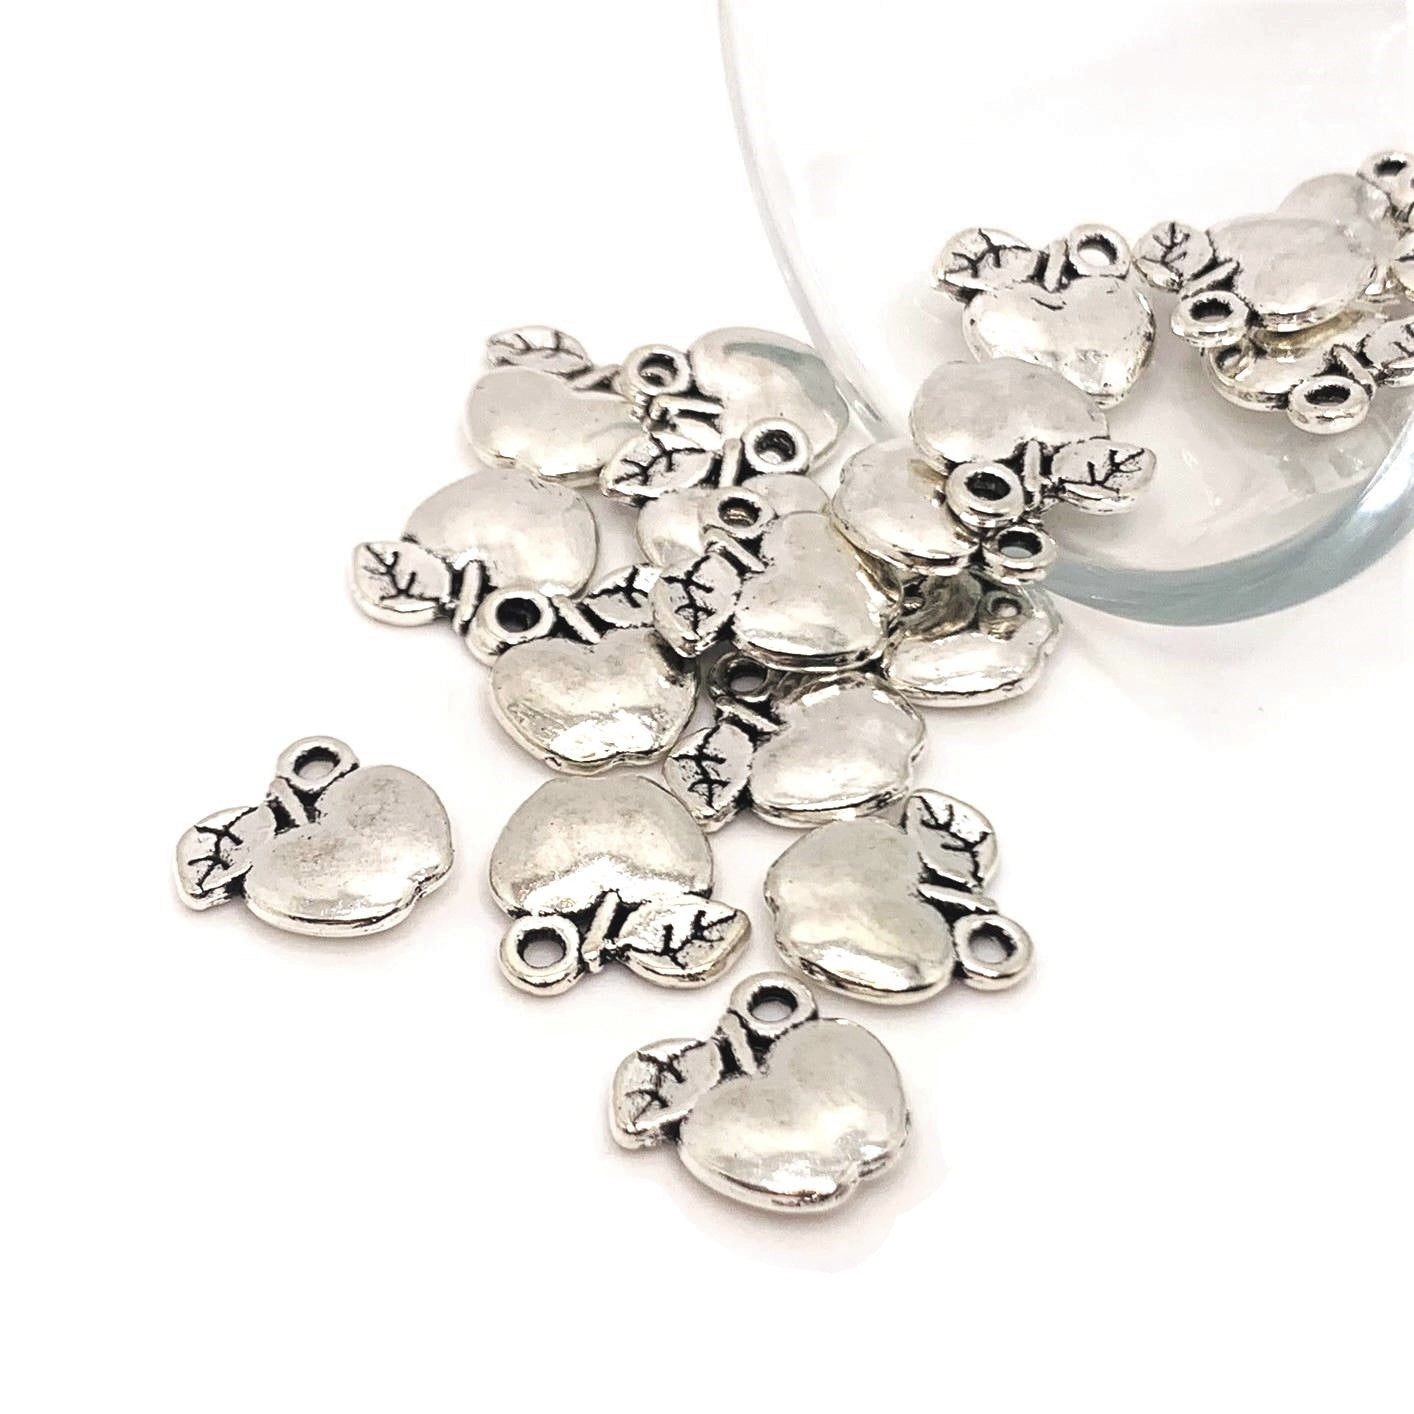 4, 20 or 50 Pieces: Silver Apple Teacher Charms - Double Sided